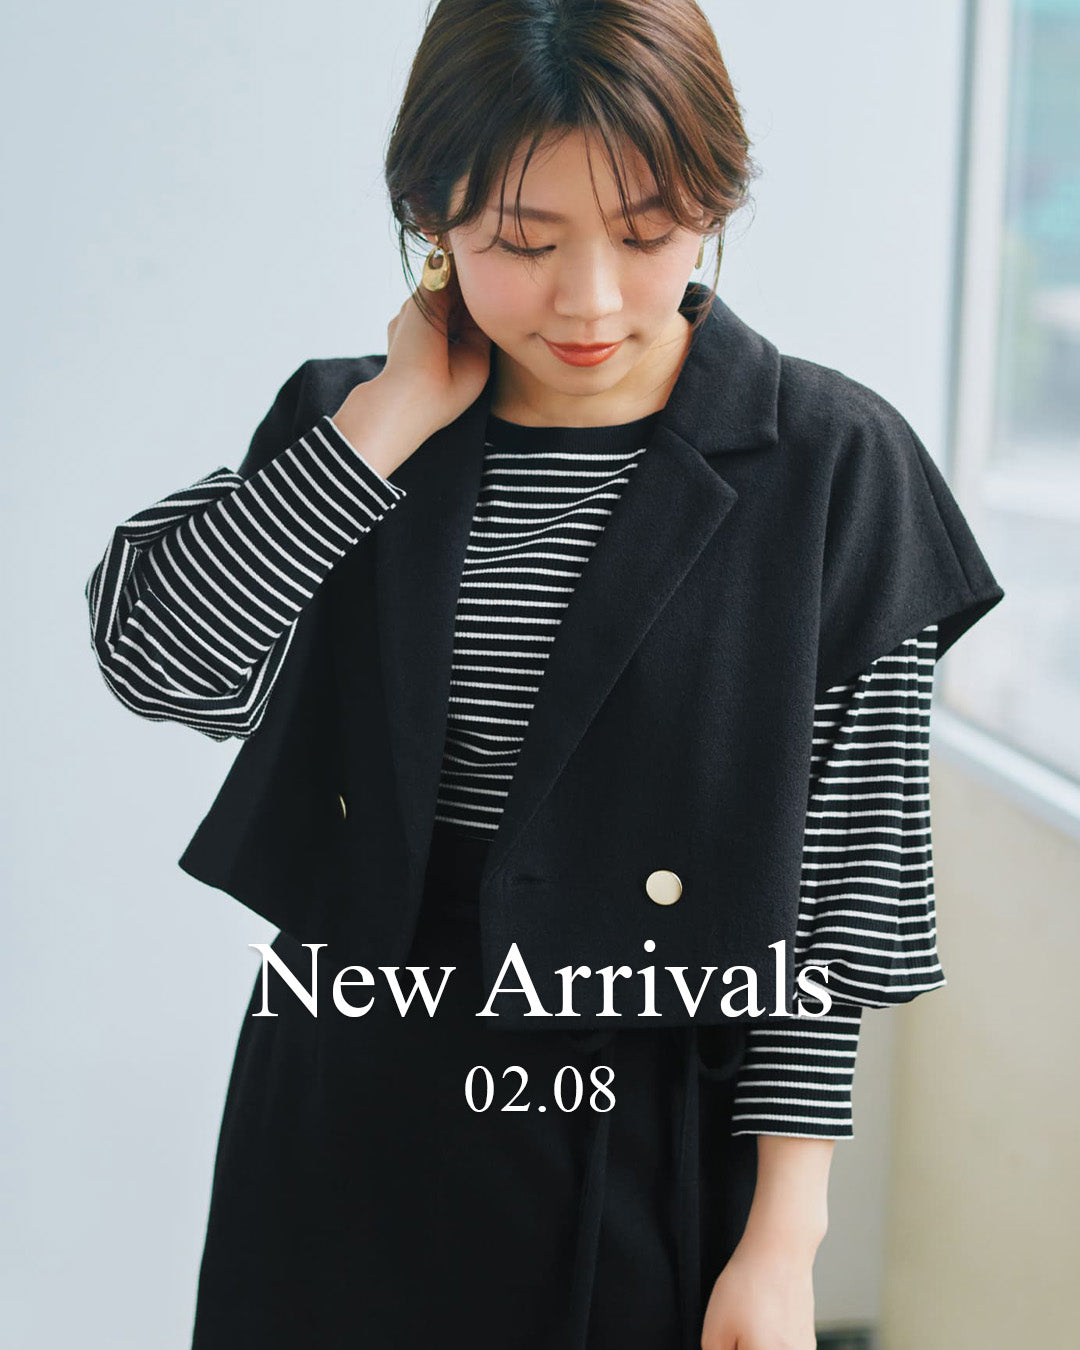 Weekly New Arrivals】2/8(水)発売の新作アイテム一覧 – tagged 